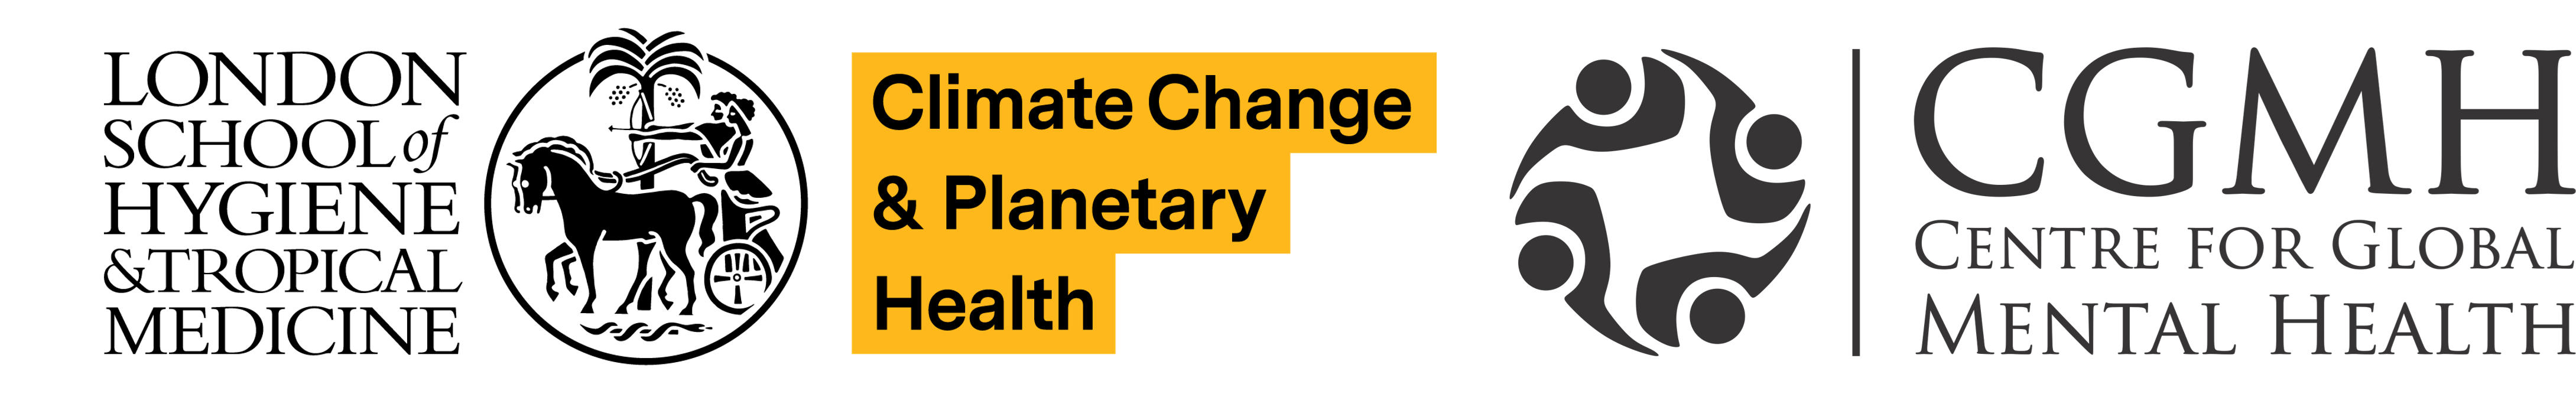 Collaborators logo - Centre on Climate Change & Planetary Health and Centre for Global Mental Health 